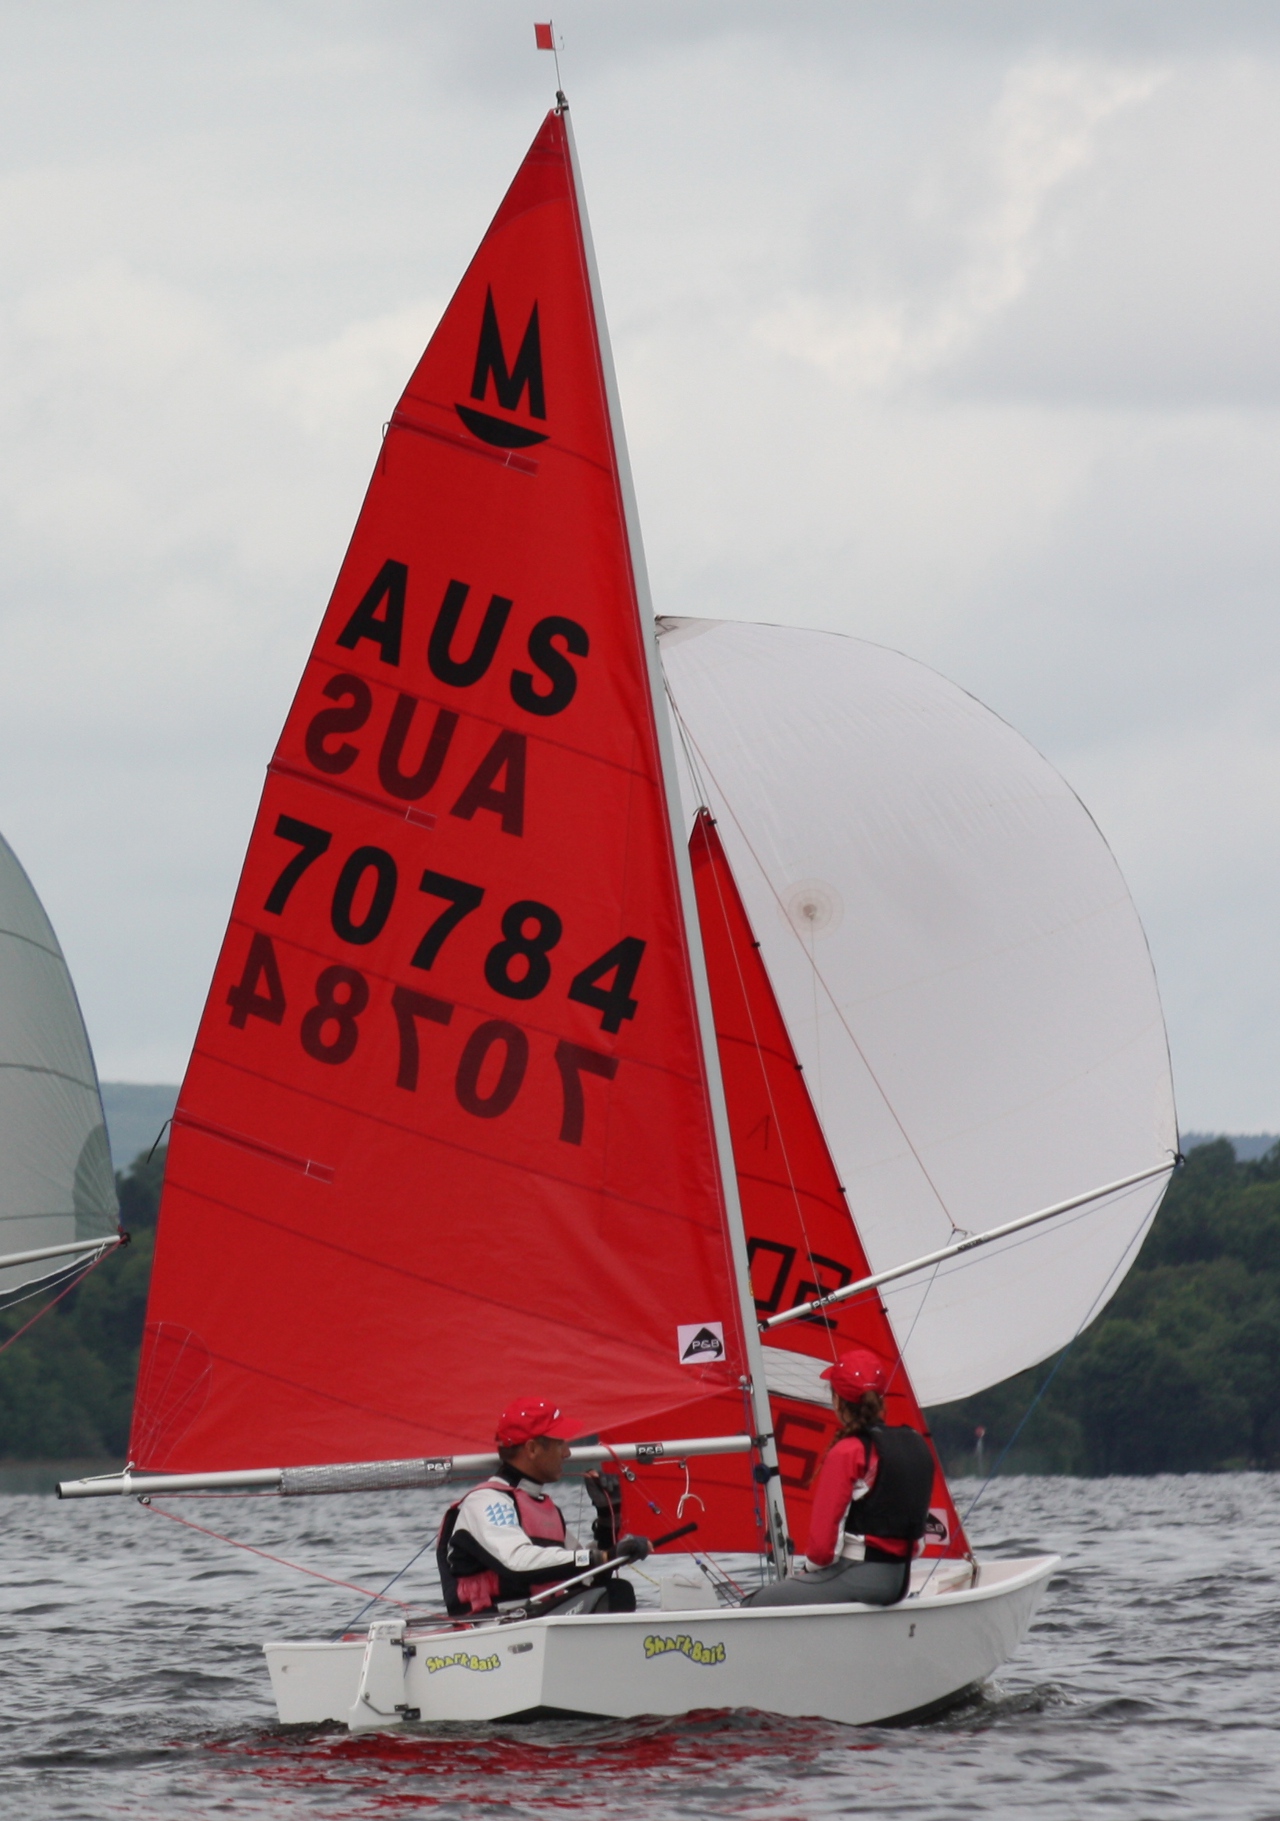 A white Mirror dinghy racing with spinnaker set